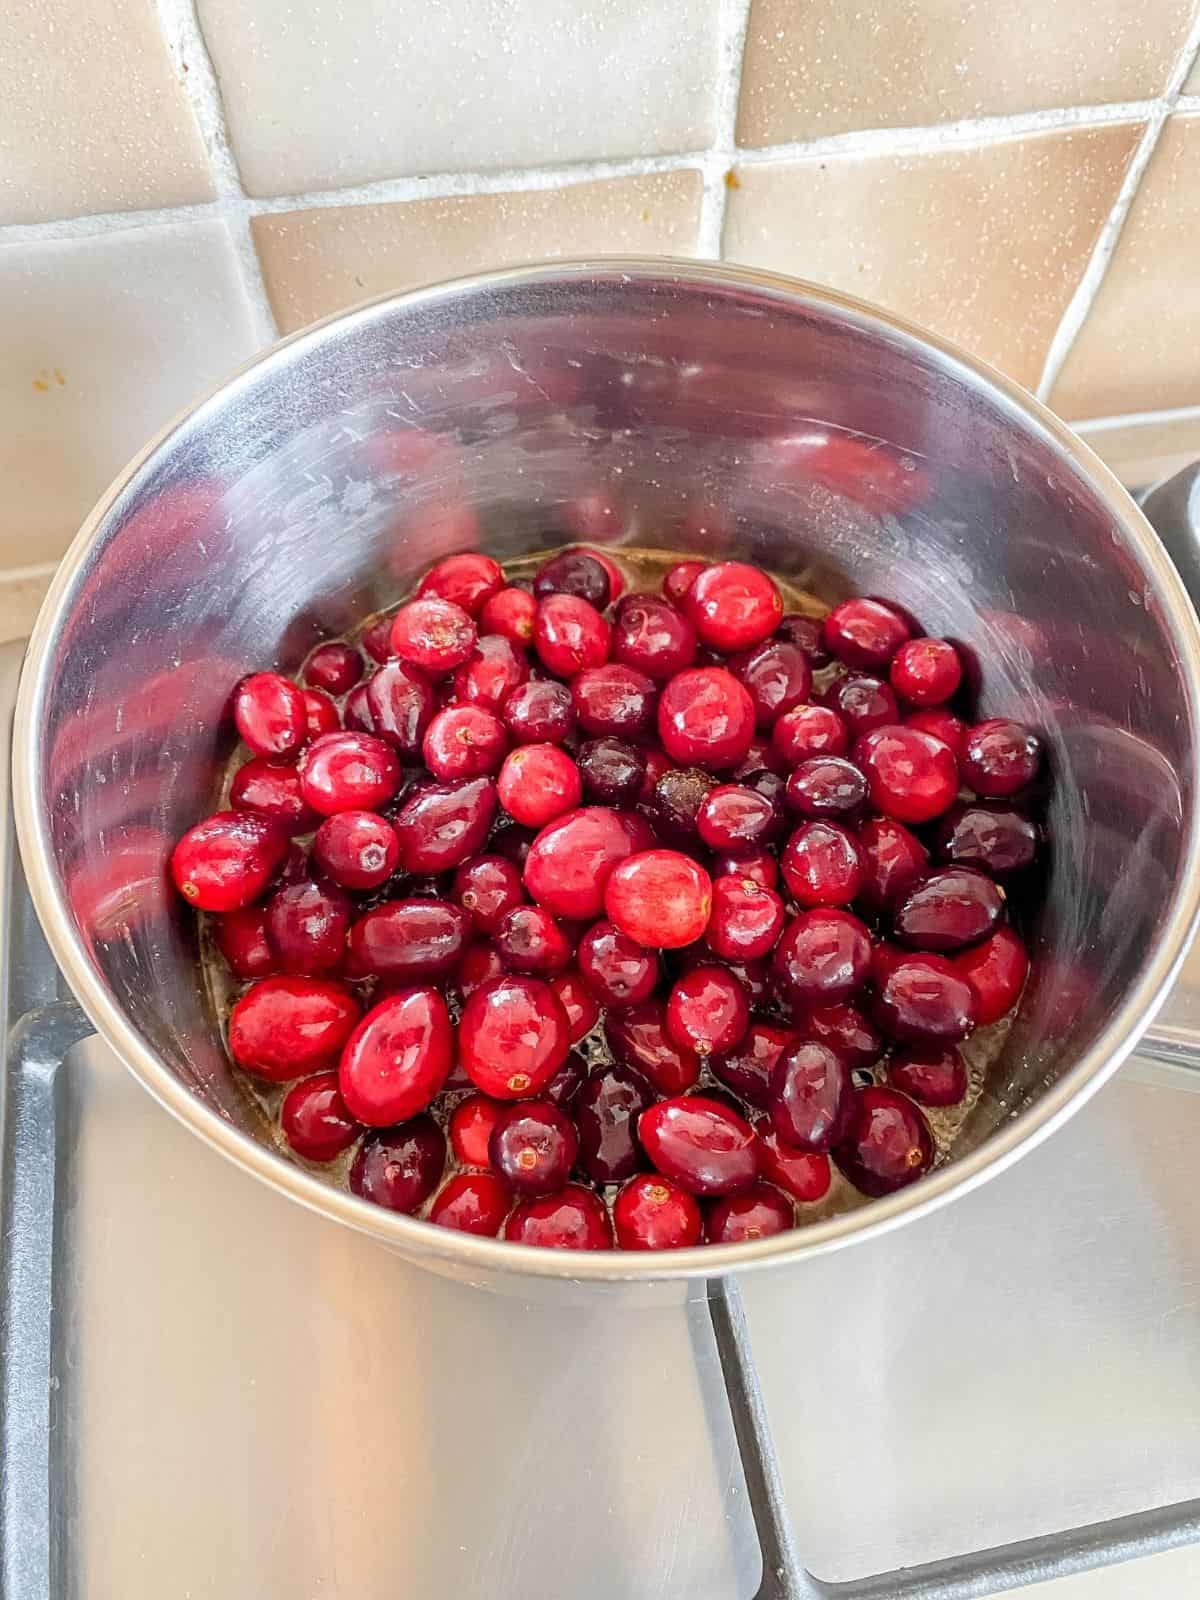 pan of cranberries on the stove top.